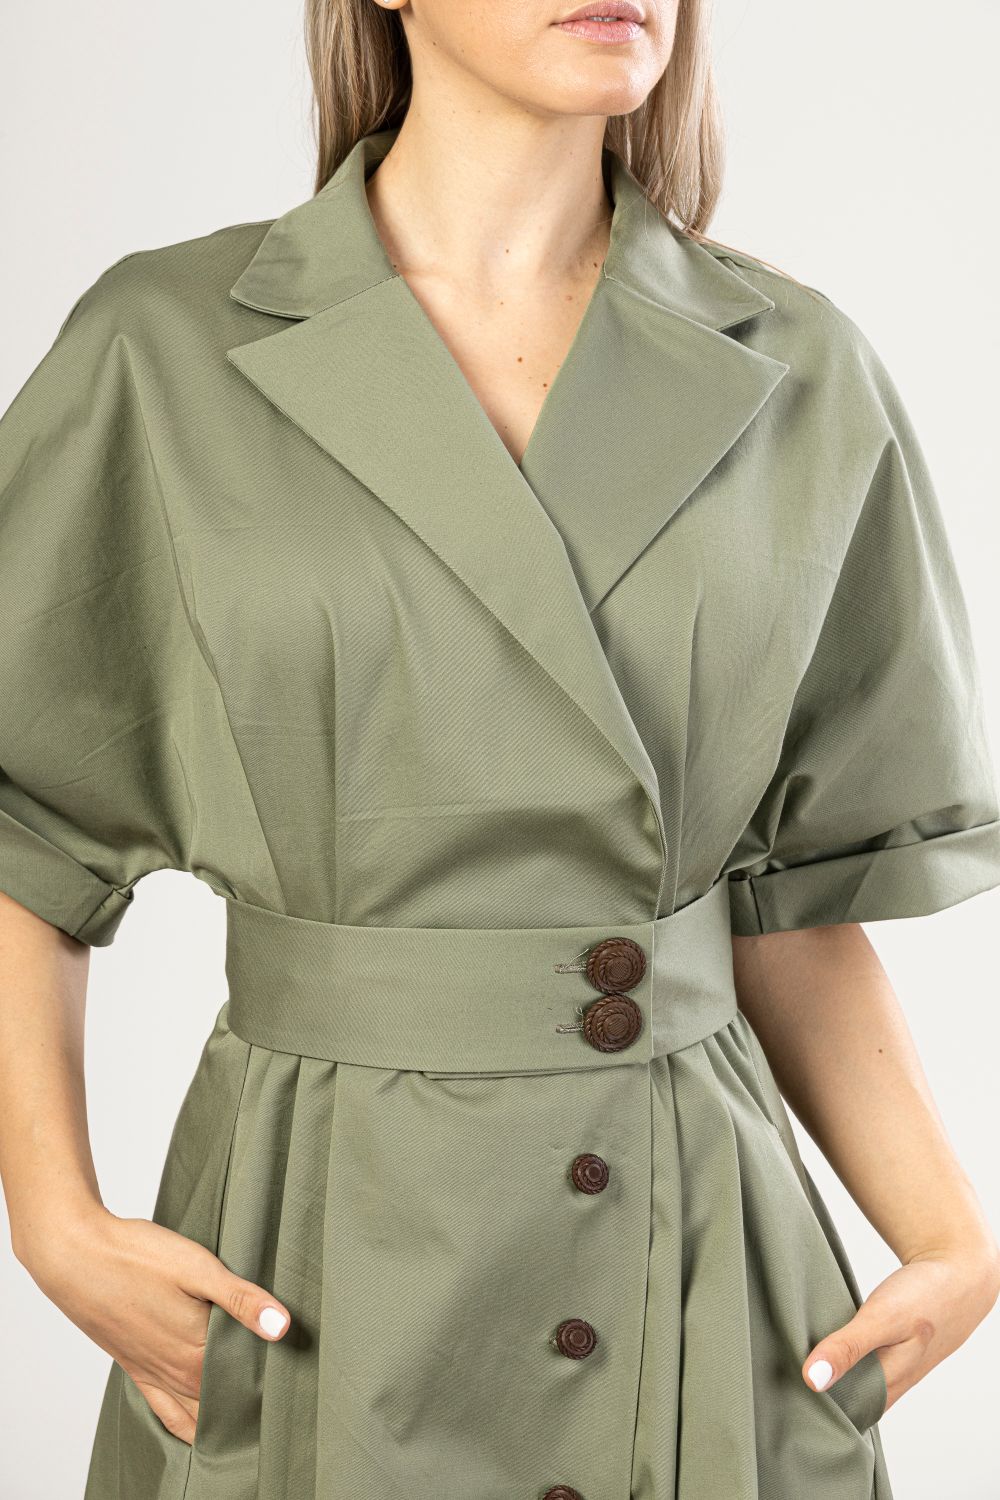 Wide Sleeves Cotton Shirt Dress with a focus on the collar, belted waist and buttons - from NikkaPlace | Effortless fashion for easy living